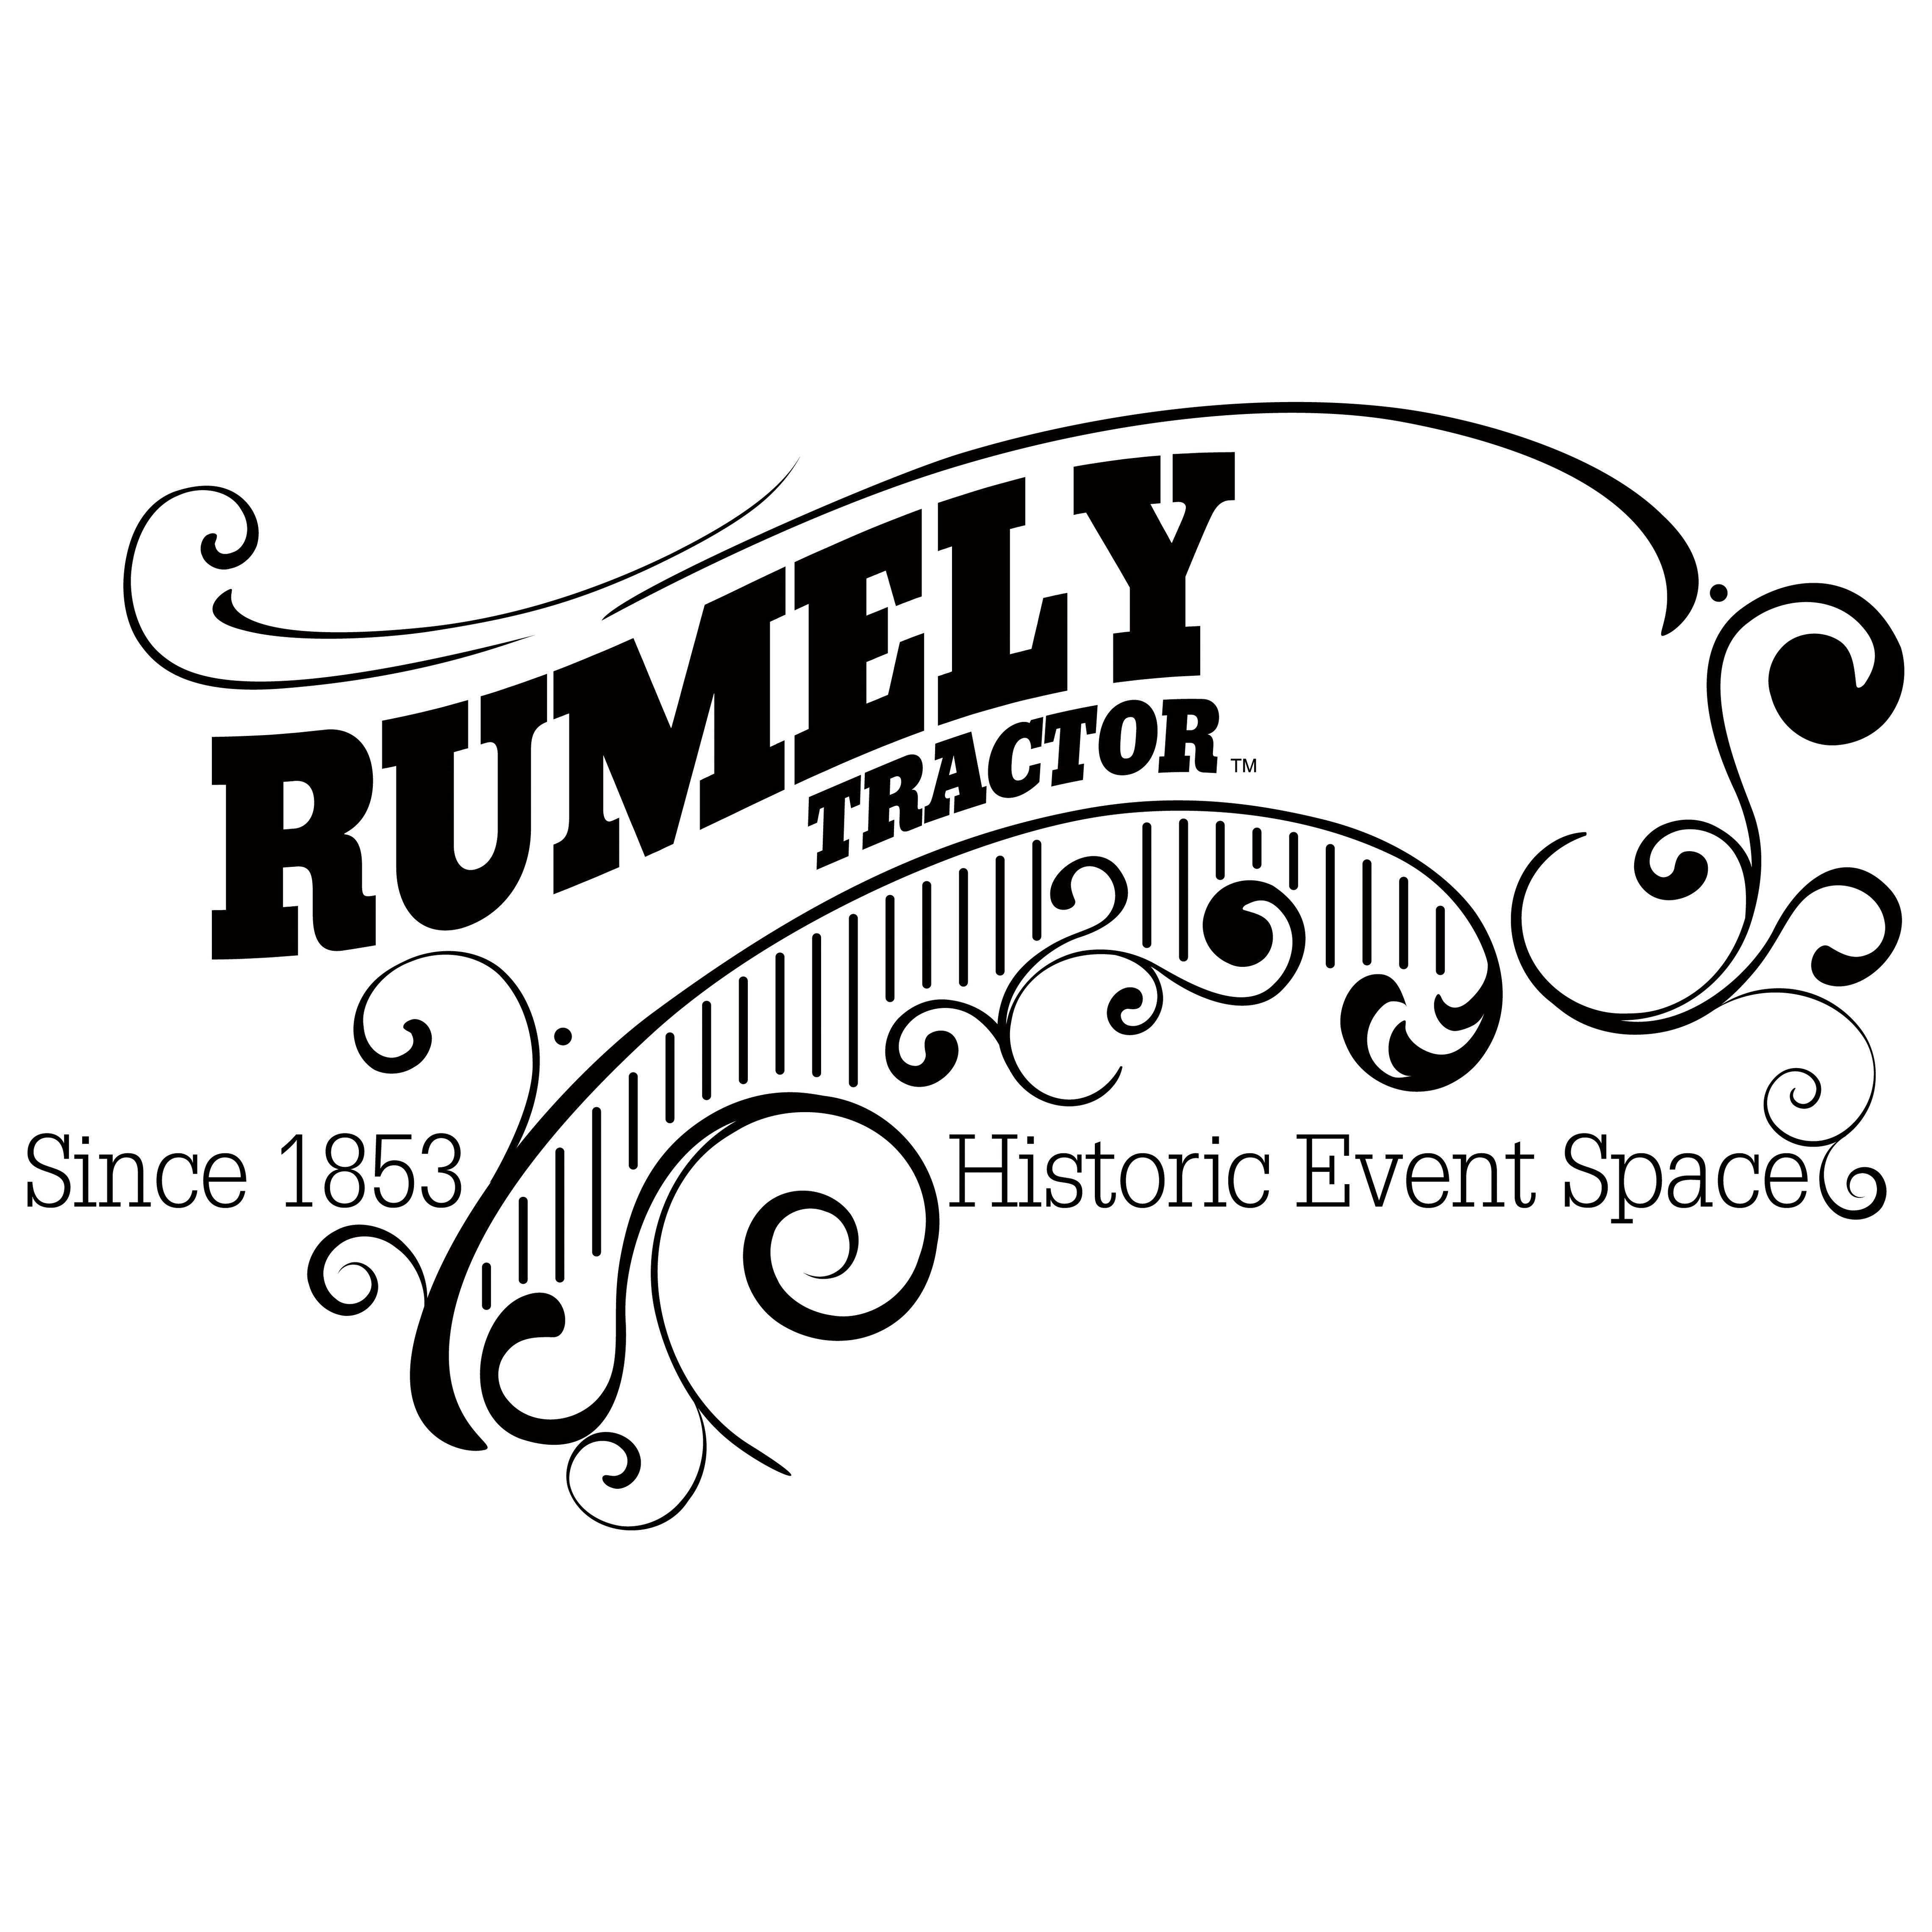 Rumely Historic Event Space Photo